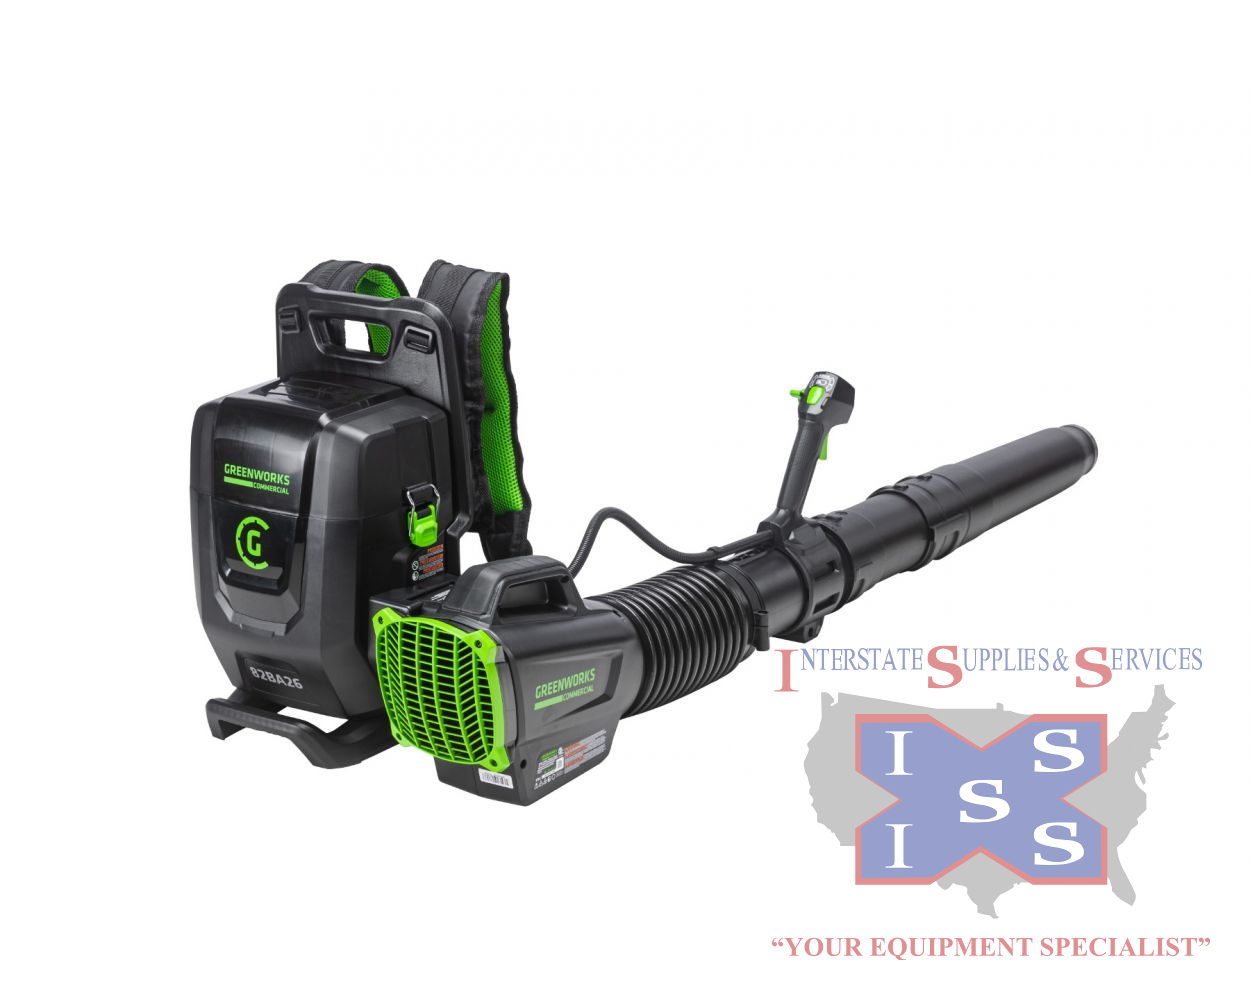 82BA26 82-Volt Gen 1.5 Dual Port Backpack Blower (Tool Only) - Click Image to Close